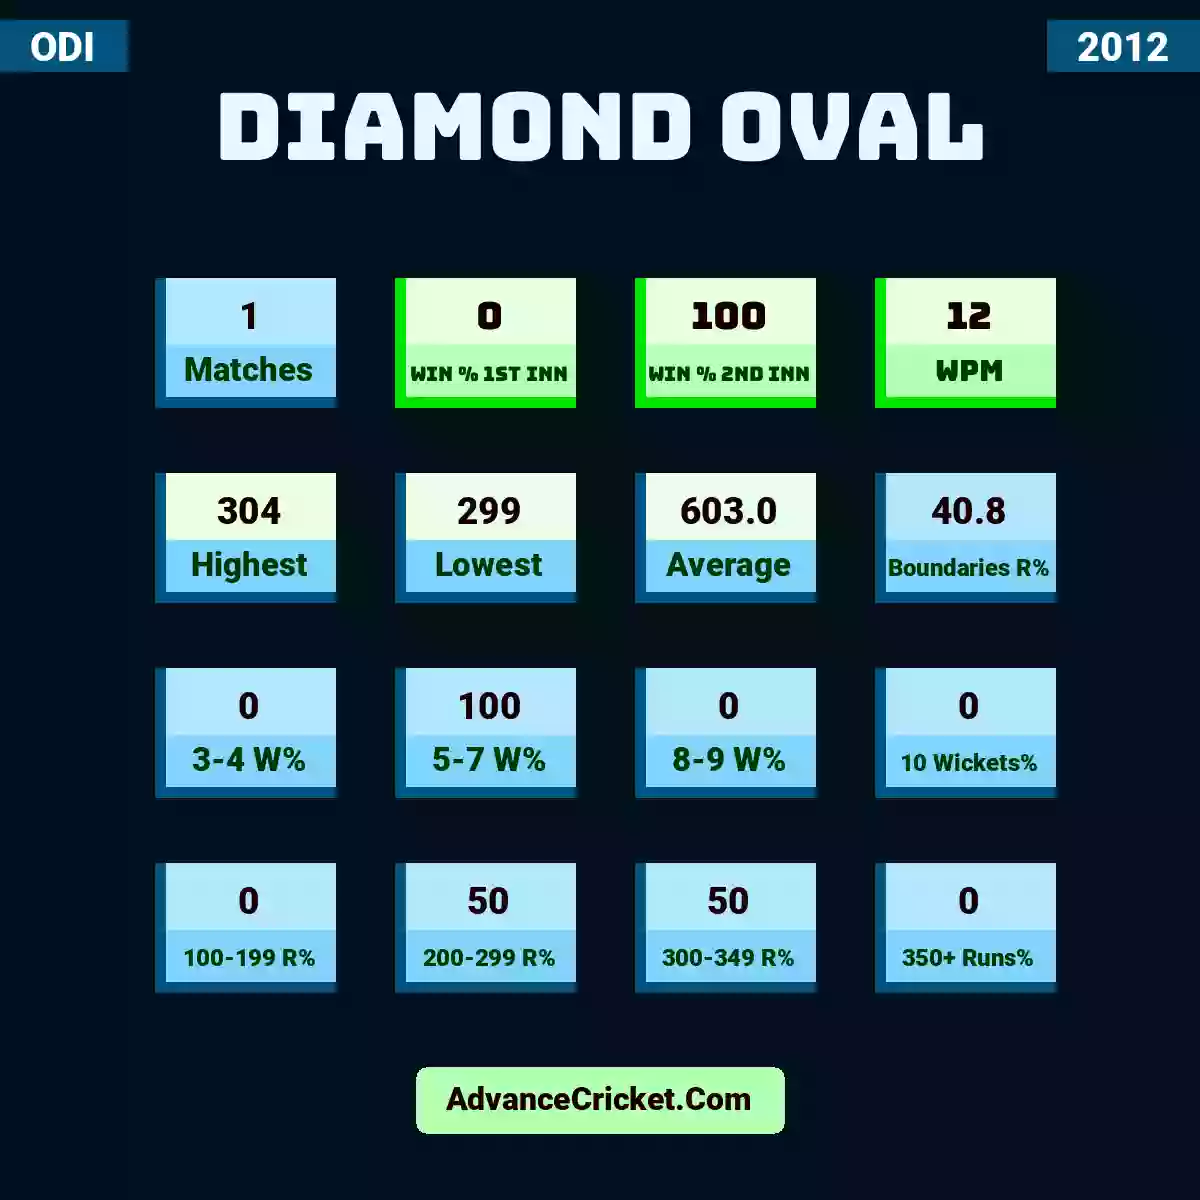 Image showing Diamond Oval with Matches: 1, Win % 1st Inn: 0, Win % 2nd Inn: 100, WPM: 12, Highest: 304, Lowest: 299, Average: 603.0, Boundaries R%: 40.8, 3-4 W%: 0, 5-7 W%: 100, 8-9 W%: 0, 10 Wickets%: 0, 100-199 R%: 0, 200-299 R%: 50, 300-349 R%: 50, 350+ Runs%: 0.